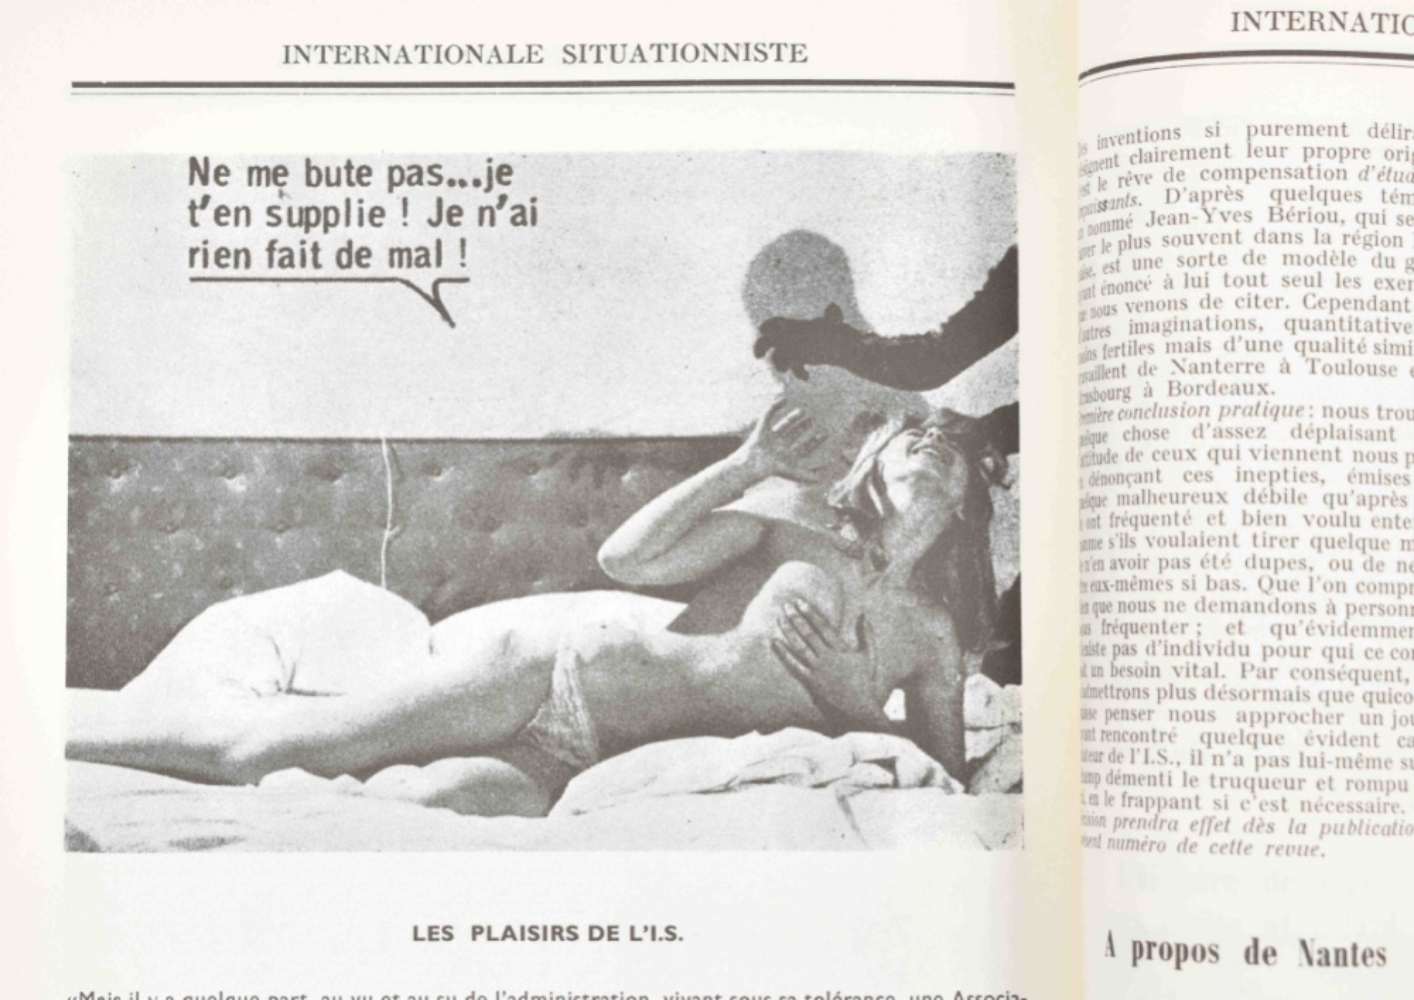 [Situationists] L'Internationale Situationniste - Image 7 of 8